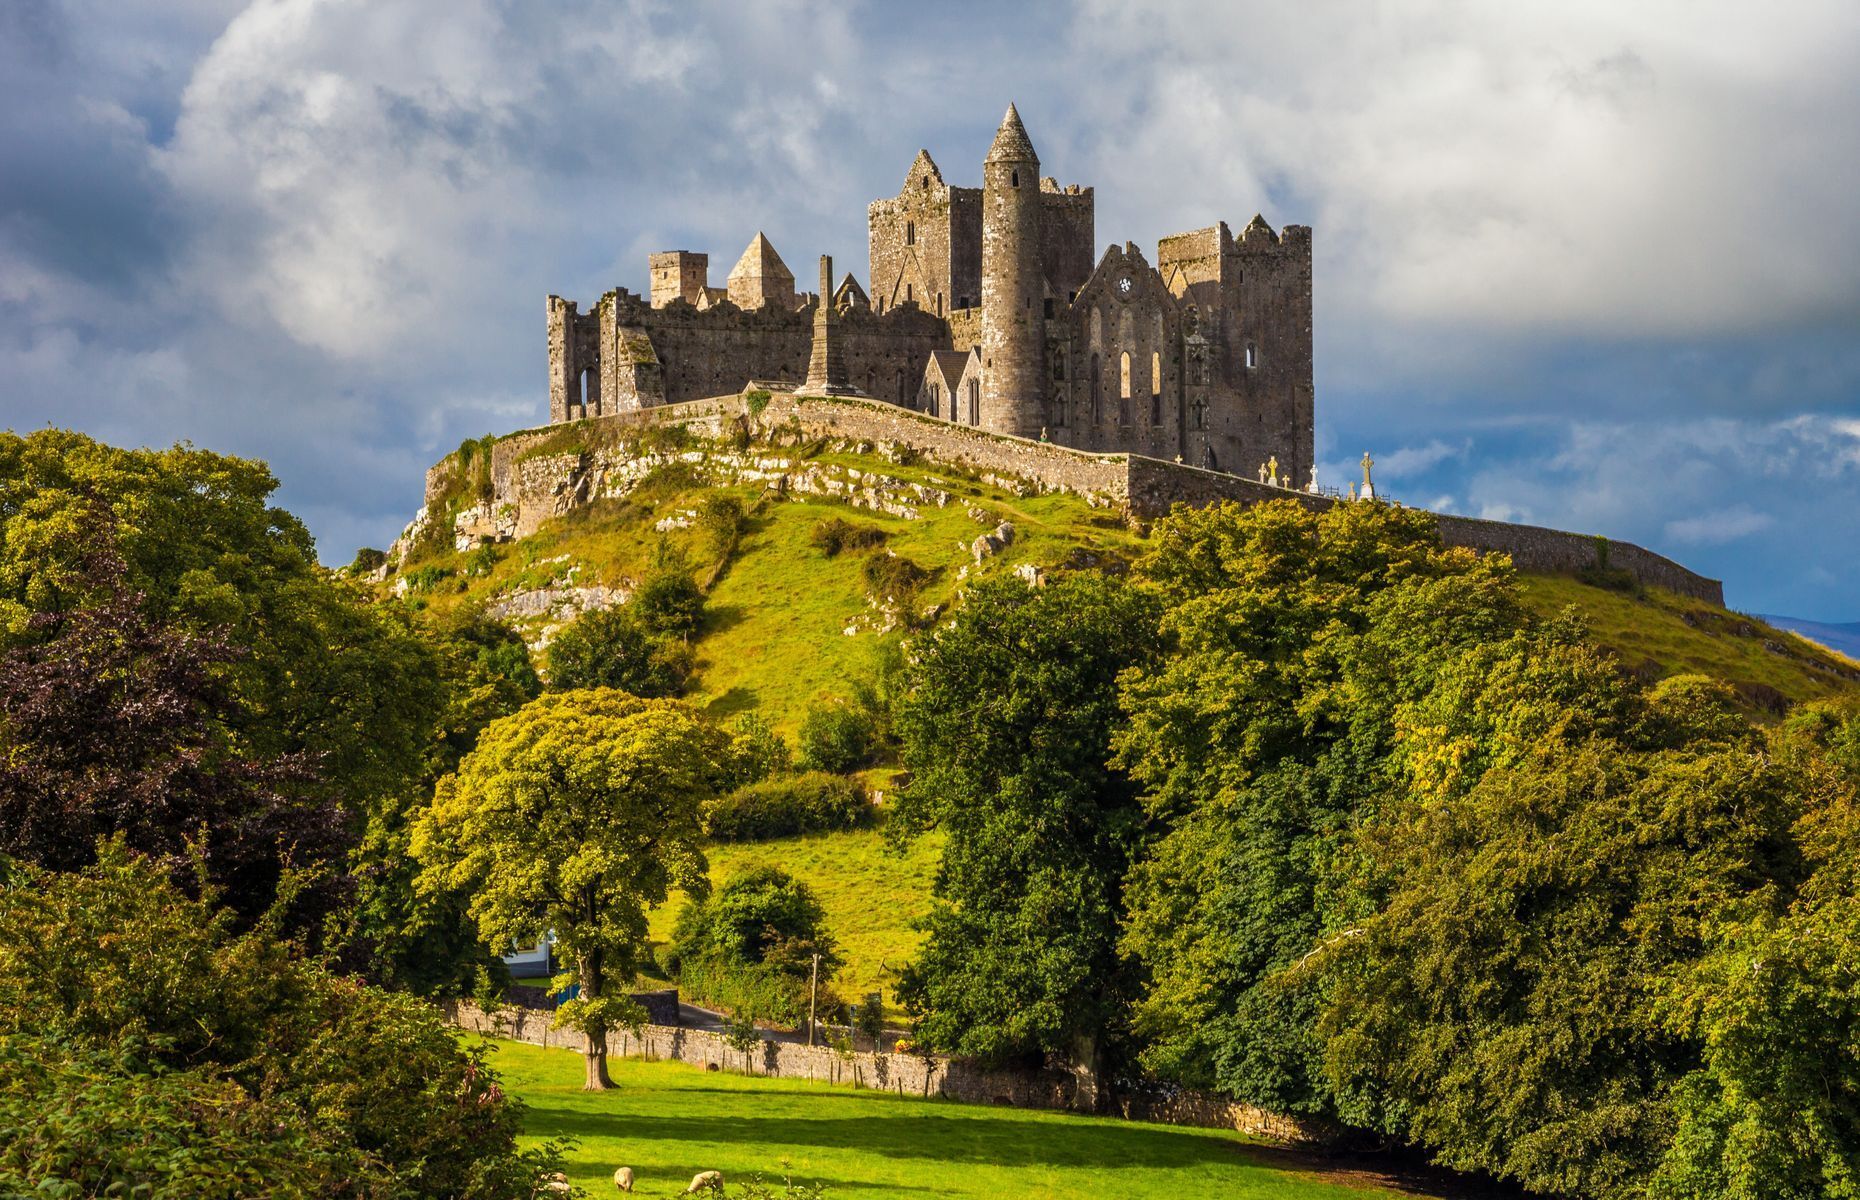 <p>The <a href="https://heritageireland.ie/visit/places-to-visit/rock-of-cashel/" rel="noreferrer noopener">Rock of Cashel</a> is a medieval relic located in County Tipperary and one of Ireland’s top heritage sites for tourists. Among several buildings dating from the Middle Ages, you’ll find a 15th-century castle, a Romanesque chapel, and a Gothic cathedral, all perched on top of a cliff.</p>